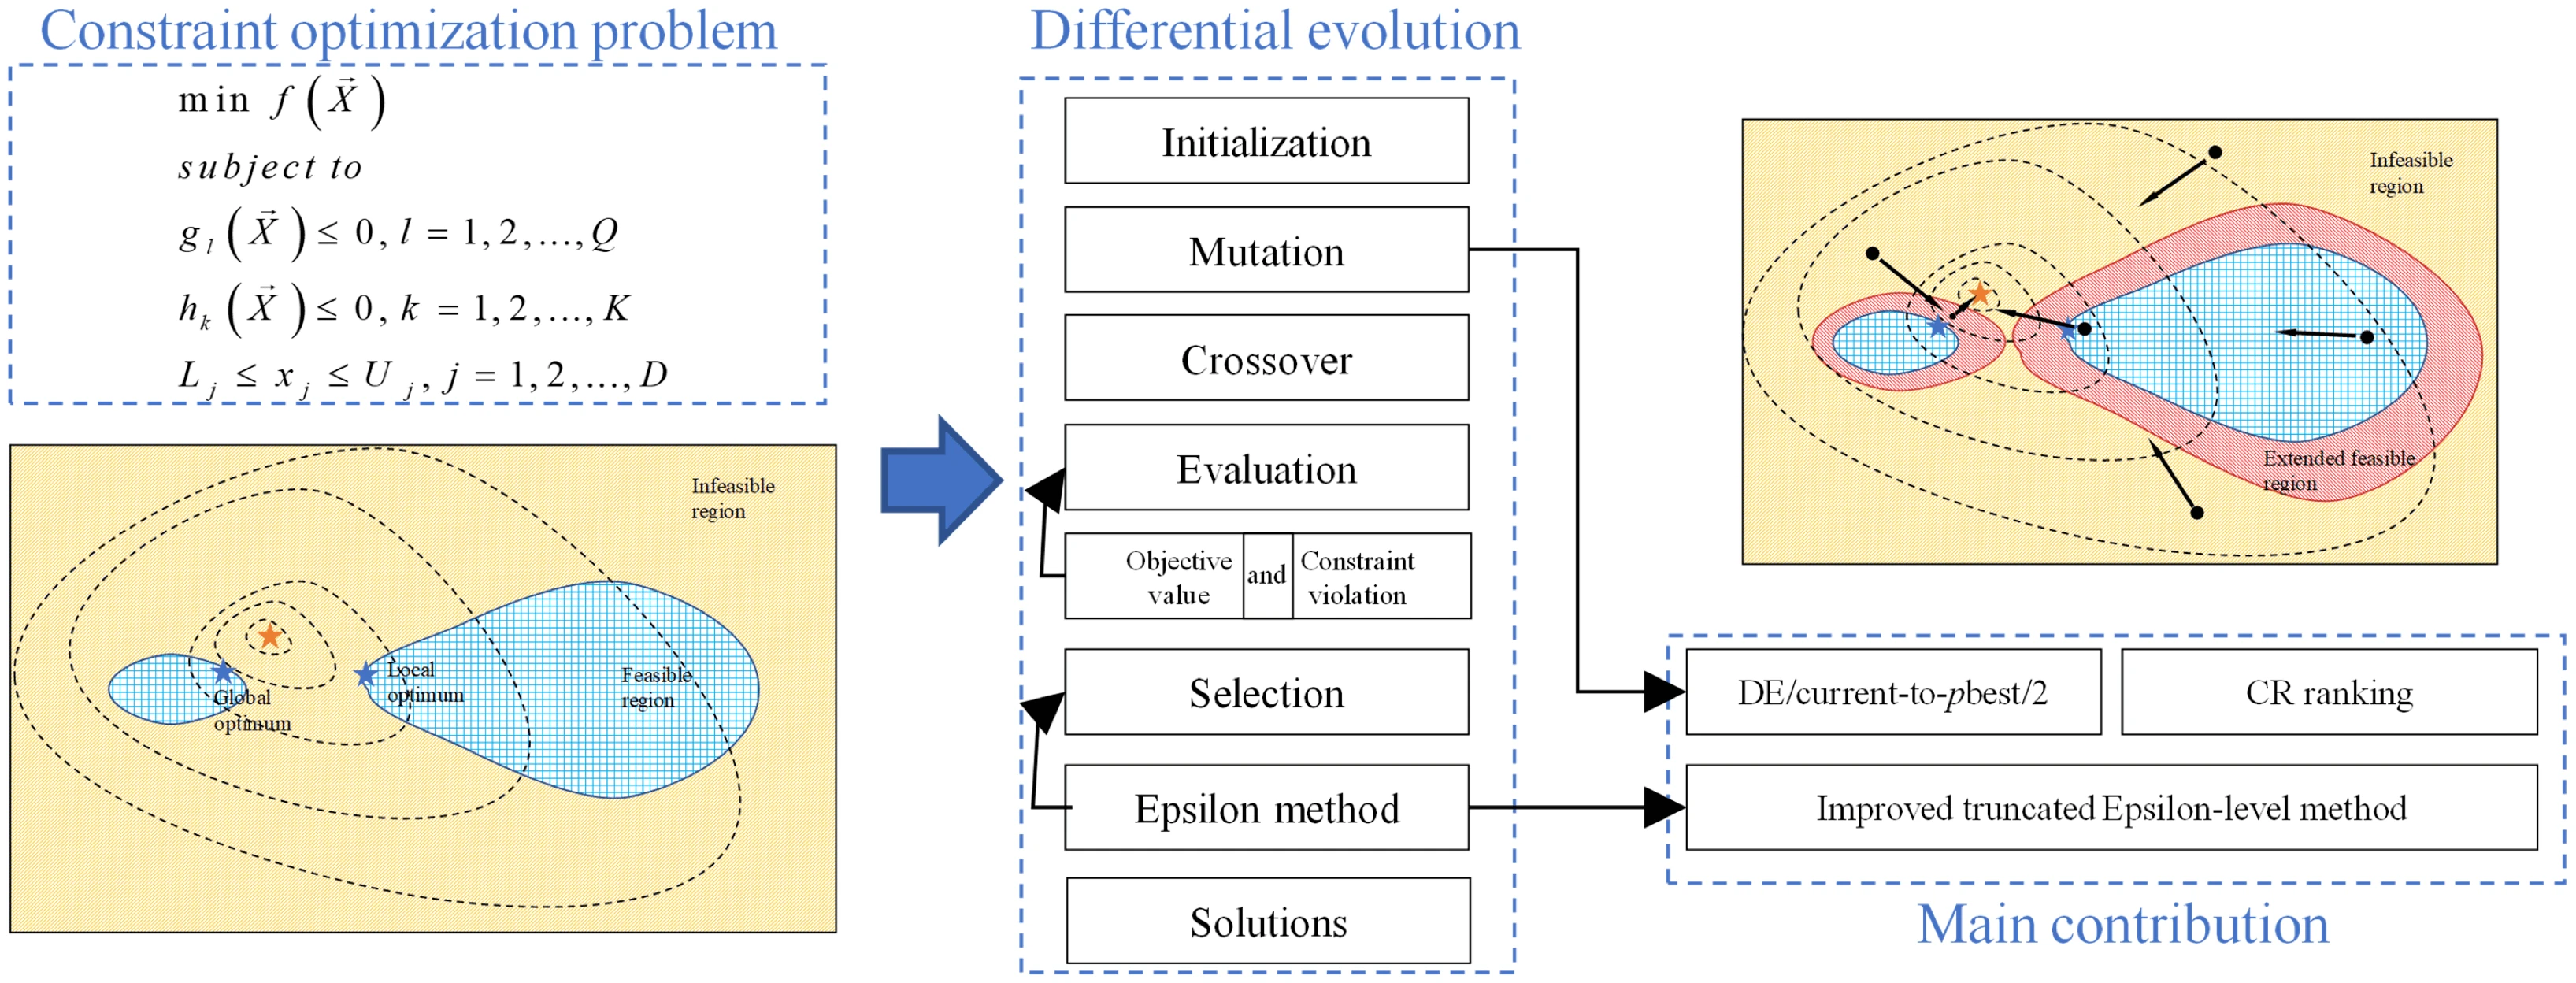 An Enhanced Adaptive Differential Evolution Approach for Constrained Optimization Problems